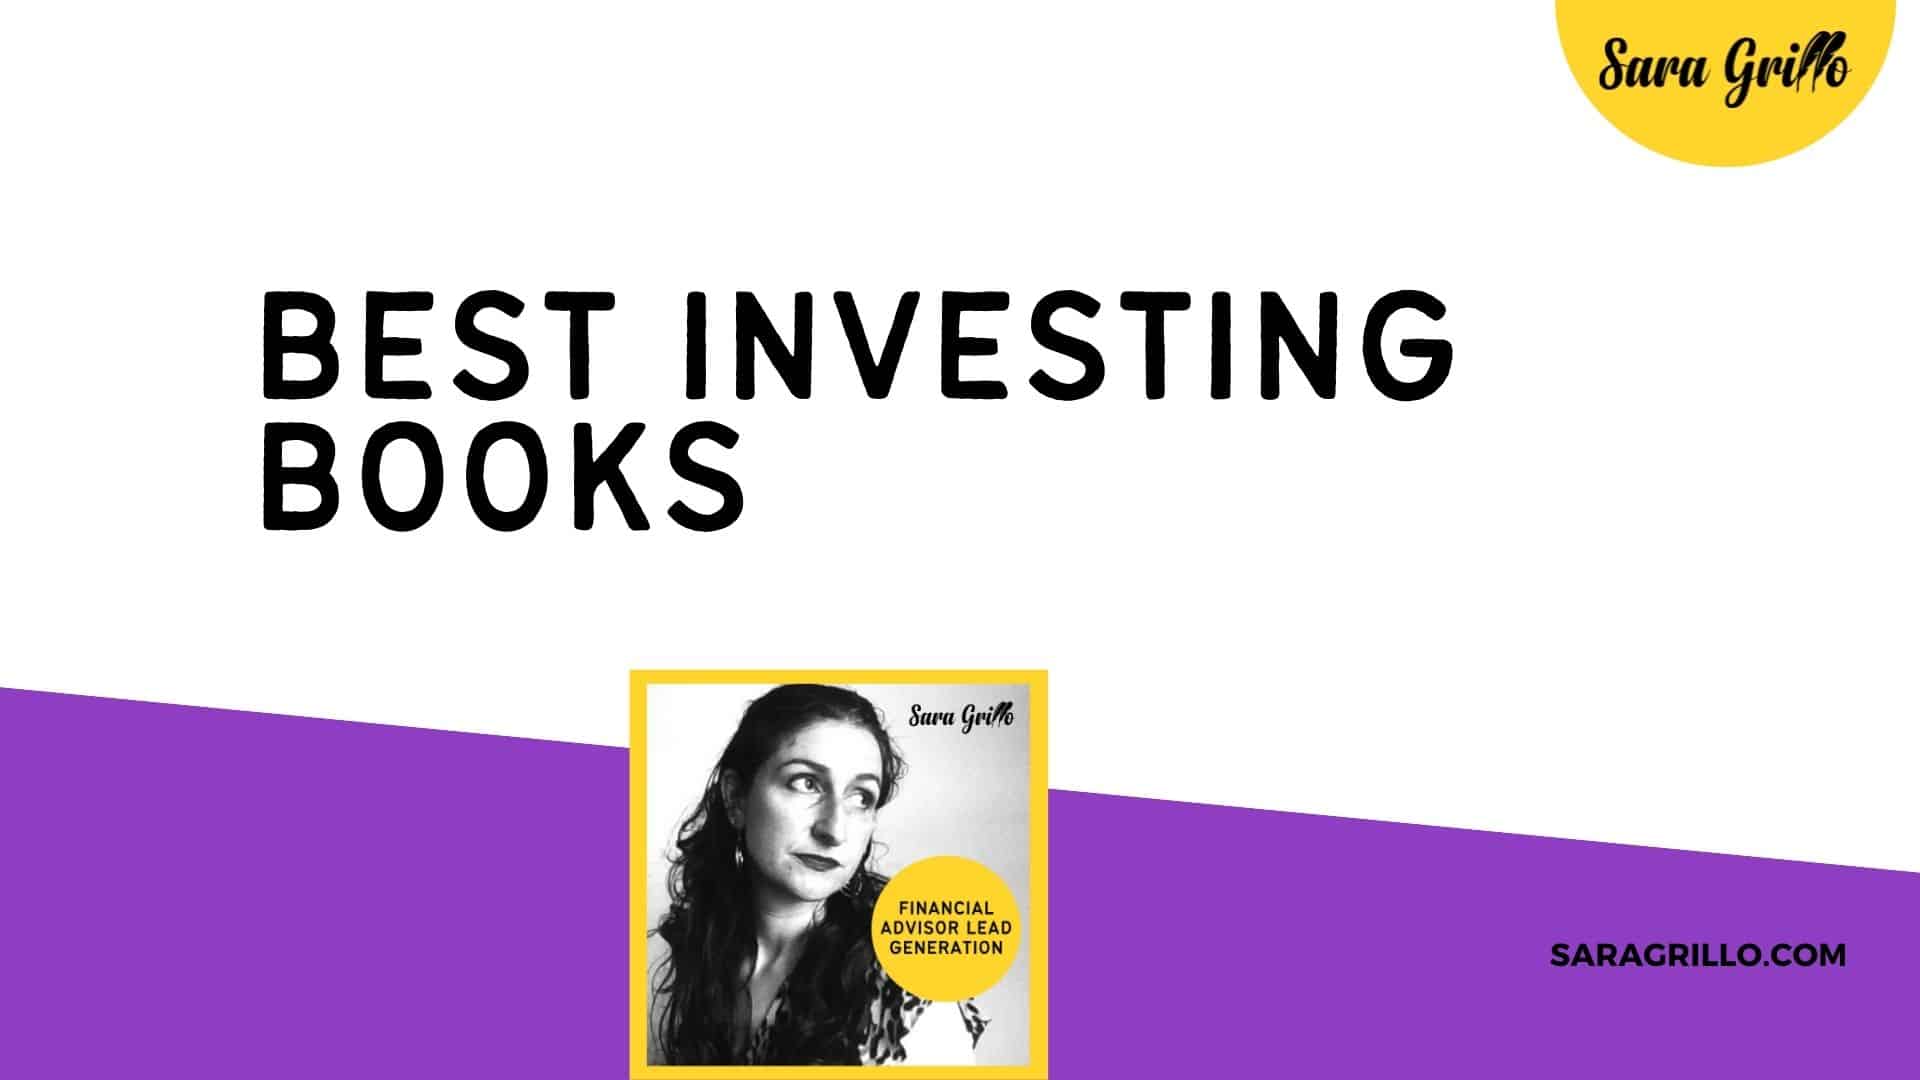 This blog talks about the best investing books of 2022 and mentions such some financial advisors have said they are reading.